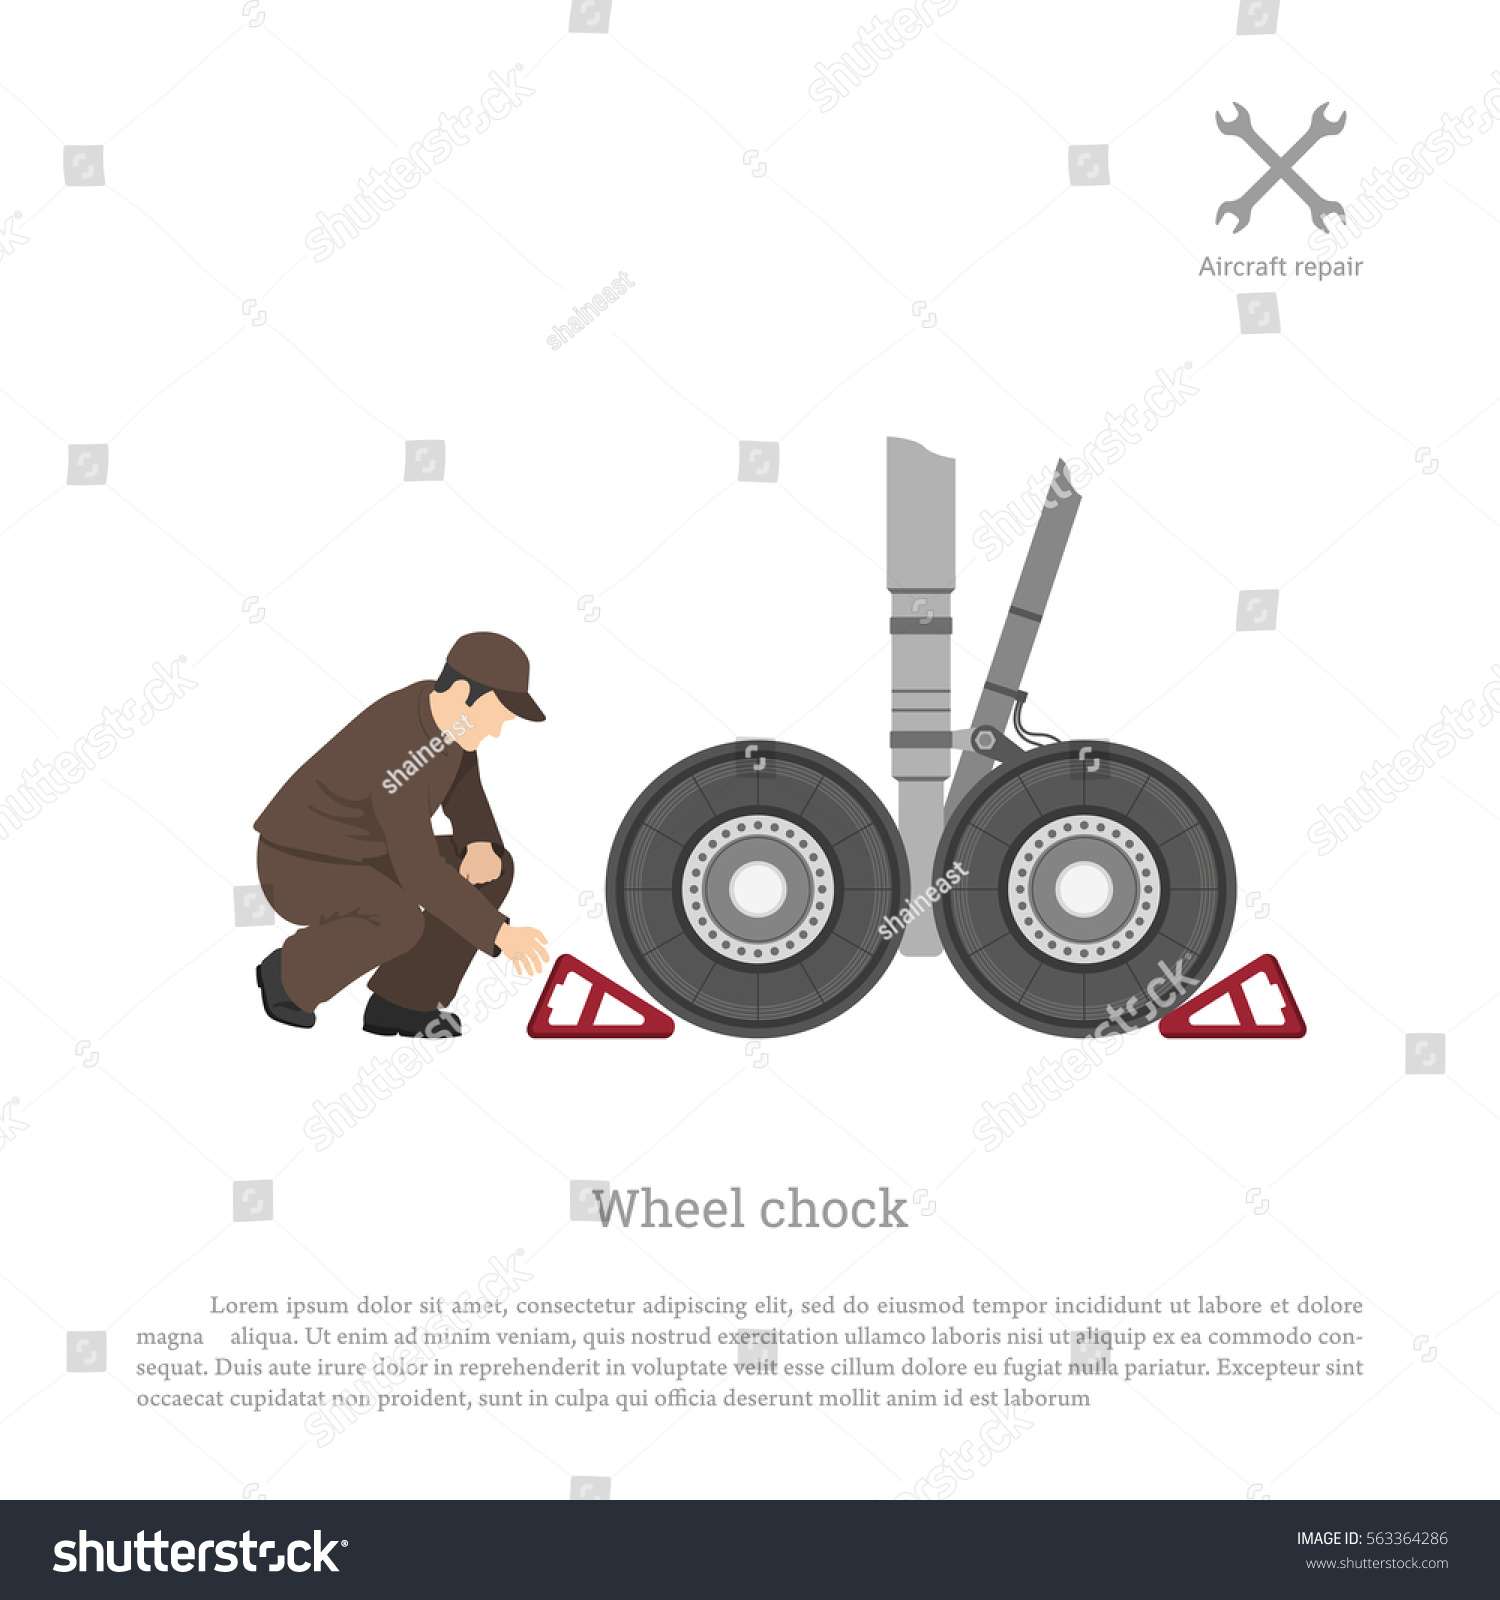 SVG of Repair and maintenance of aircraft. The mechanic puts a wheel chock for airplane. Vector illustration. svg